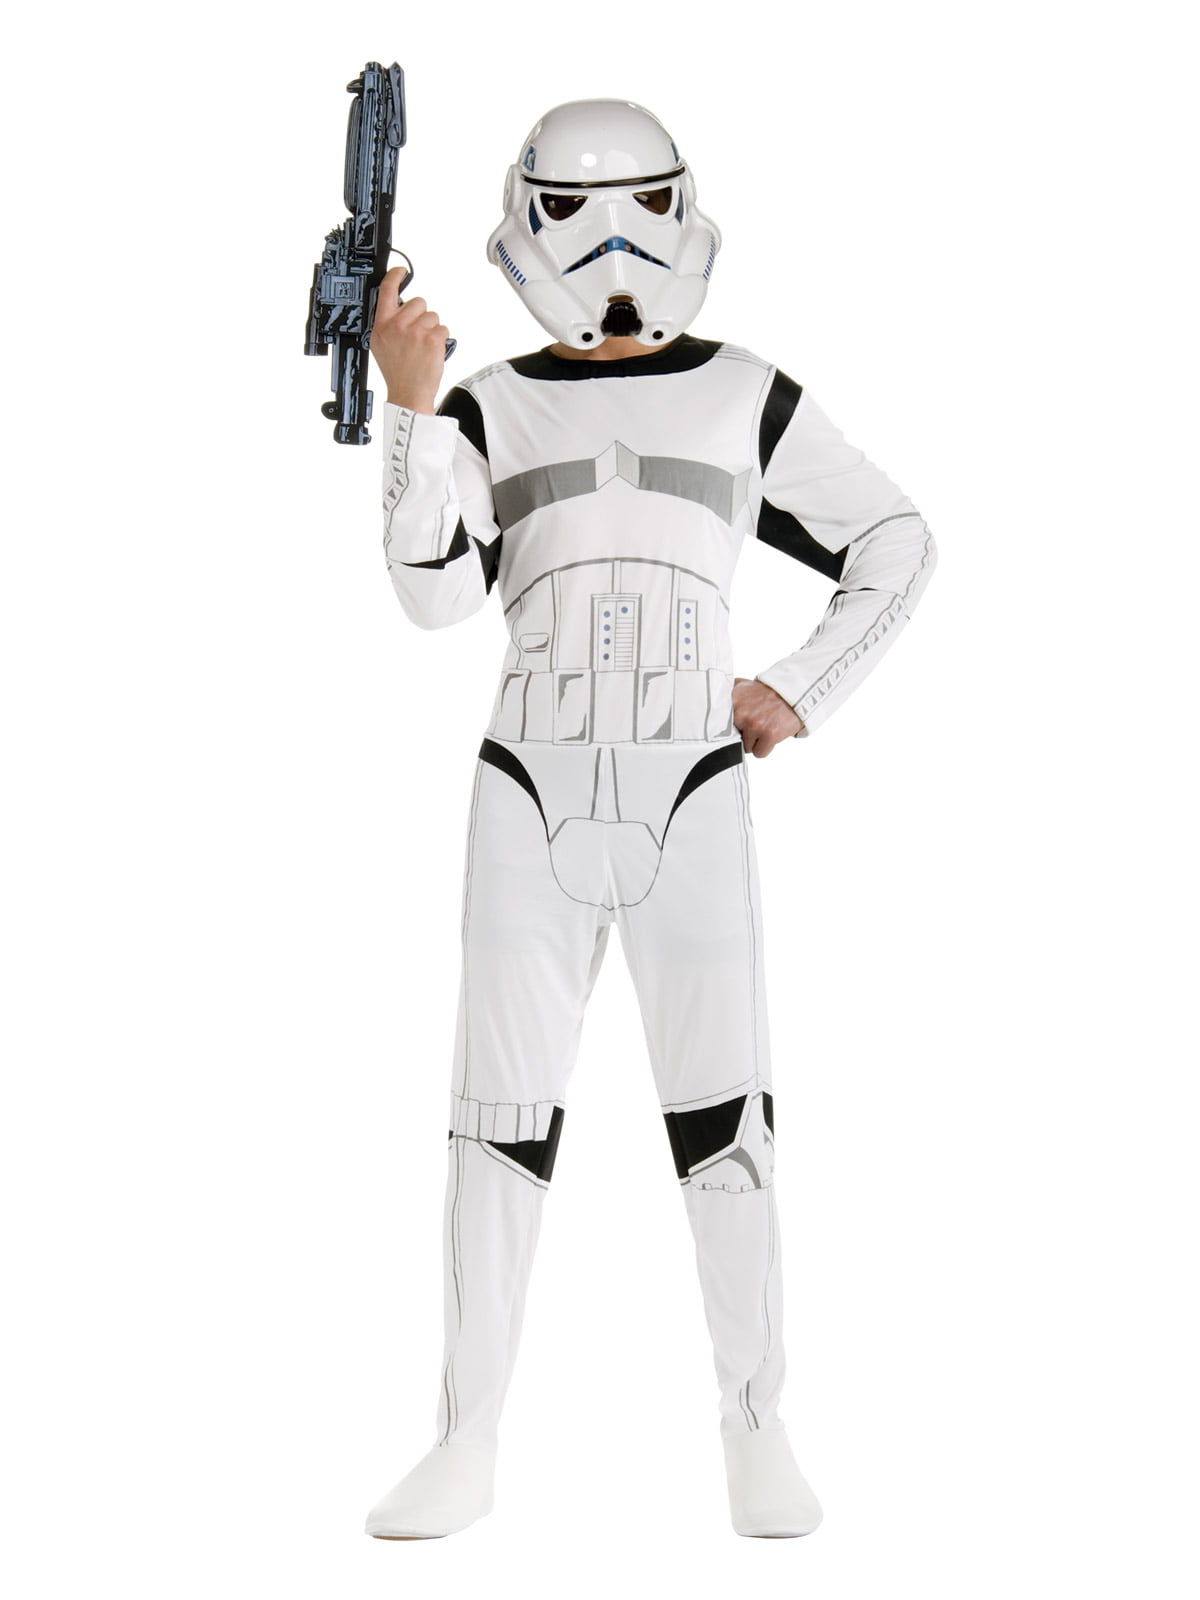 Featured image for “STORMTROOPER CLASSIC COSTUME, ADULT”